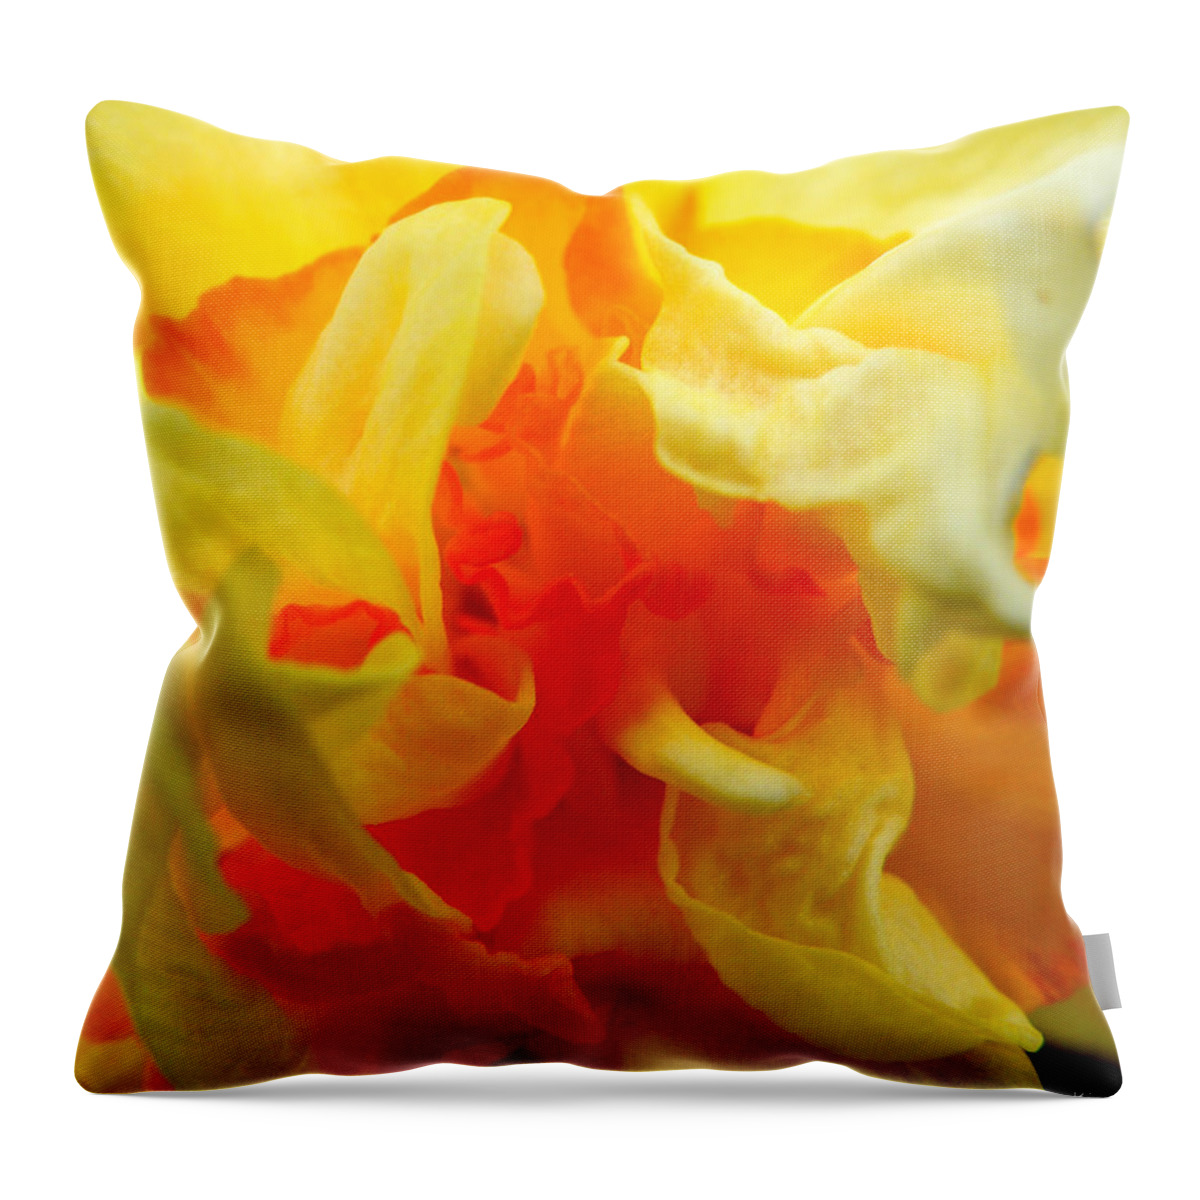 Botanical Throw Pillow featuring the photograph Vibrant Daffodil by Kimmary MacLean